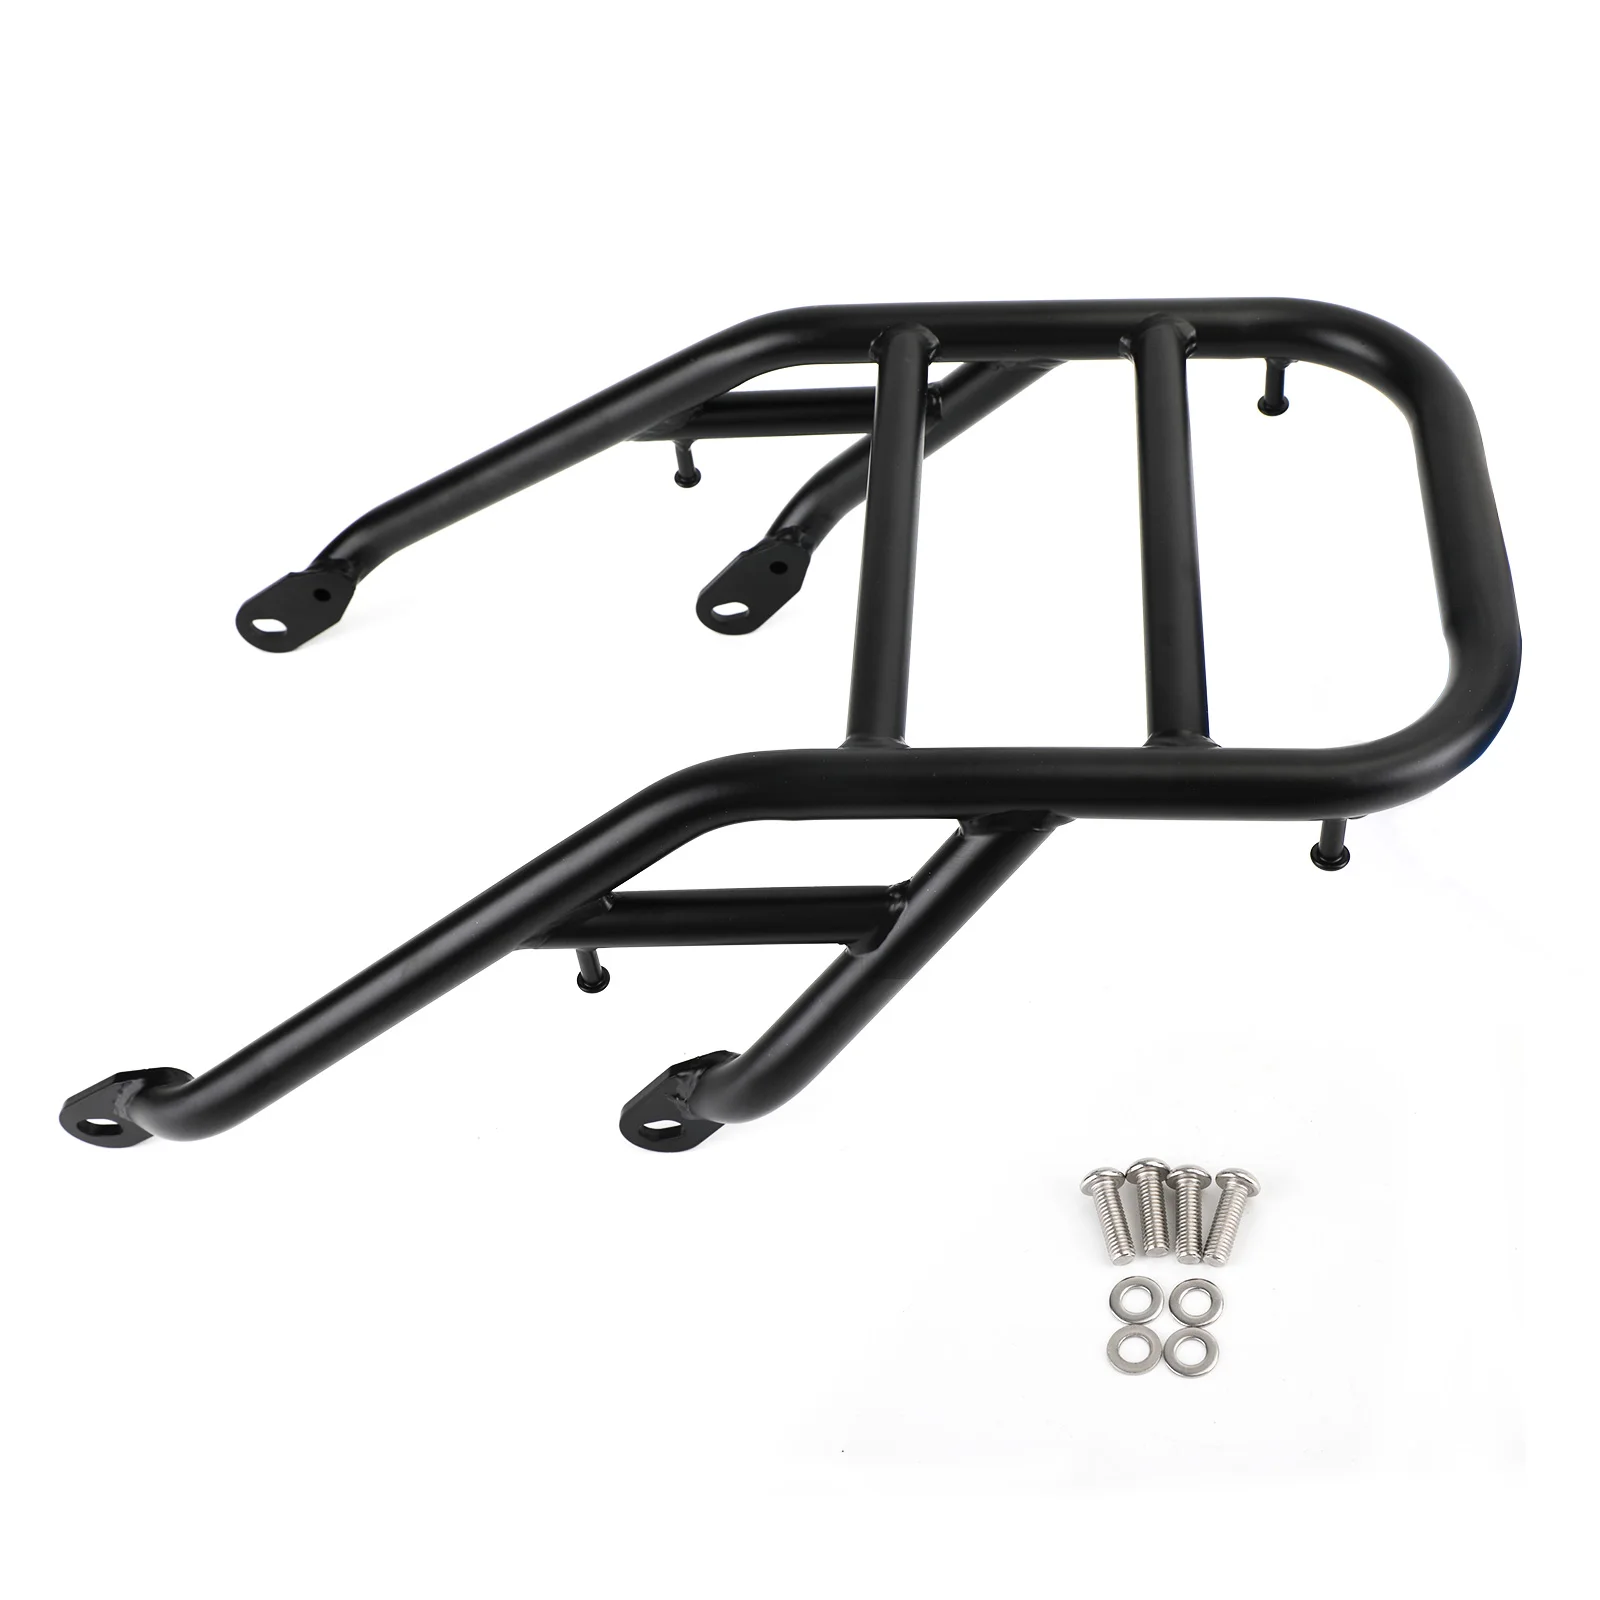 Lorababer Motorcycle Rear Black Luggage Rack Support Shelf Fit For Stock Solo Seat Honda CMX Rebel 300 500 2017 2018 2019 2020 Luggage Carrier Rear Fender Fairing 